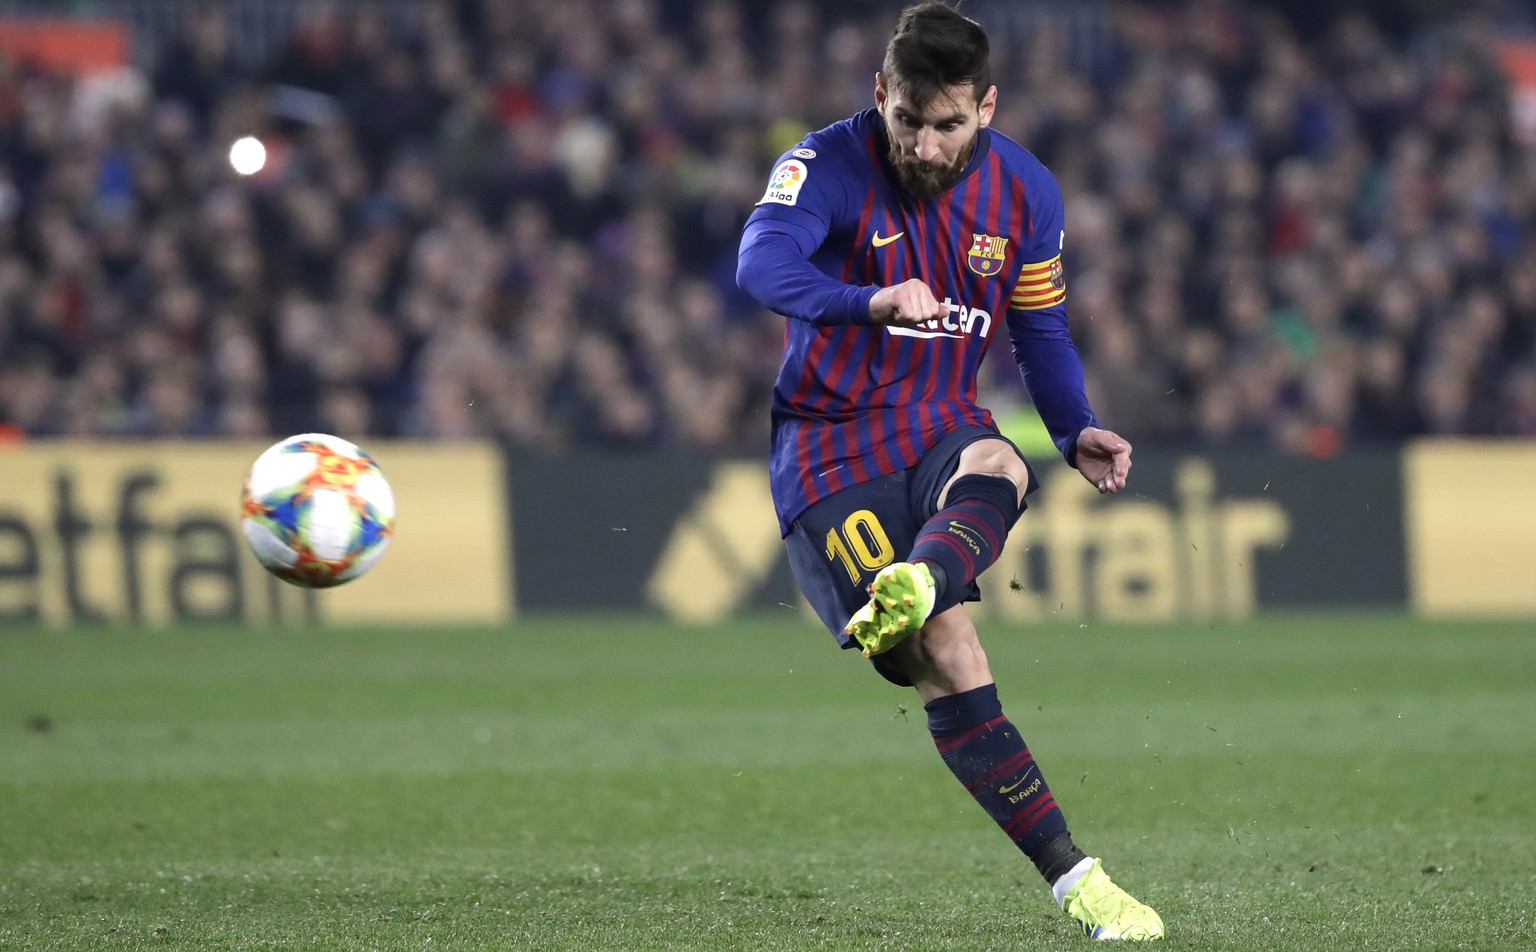 Barcelona forward Lionel Messi takes a free kick during the Copa del Rey semifinal first leg soccer match between FC Barcelona and Real Madrid at the Camp Nou stadium in Barcelona, Spain, Wednesday Fe ...